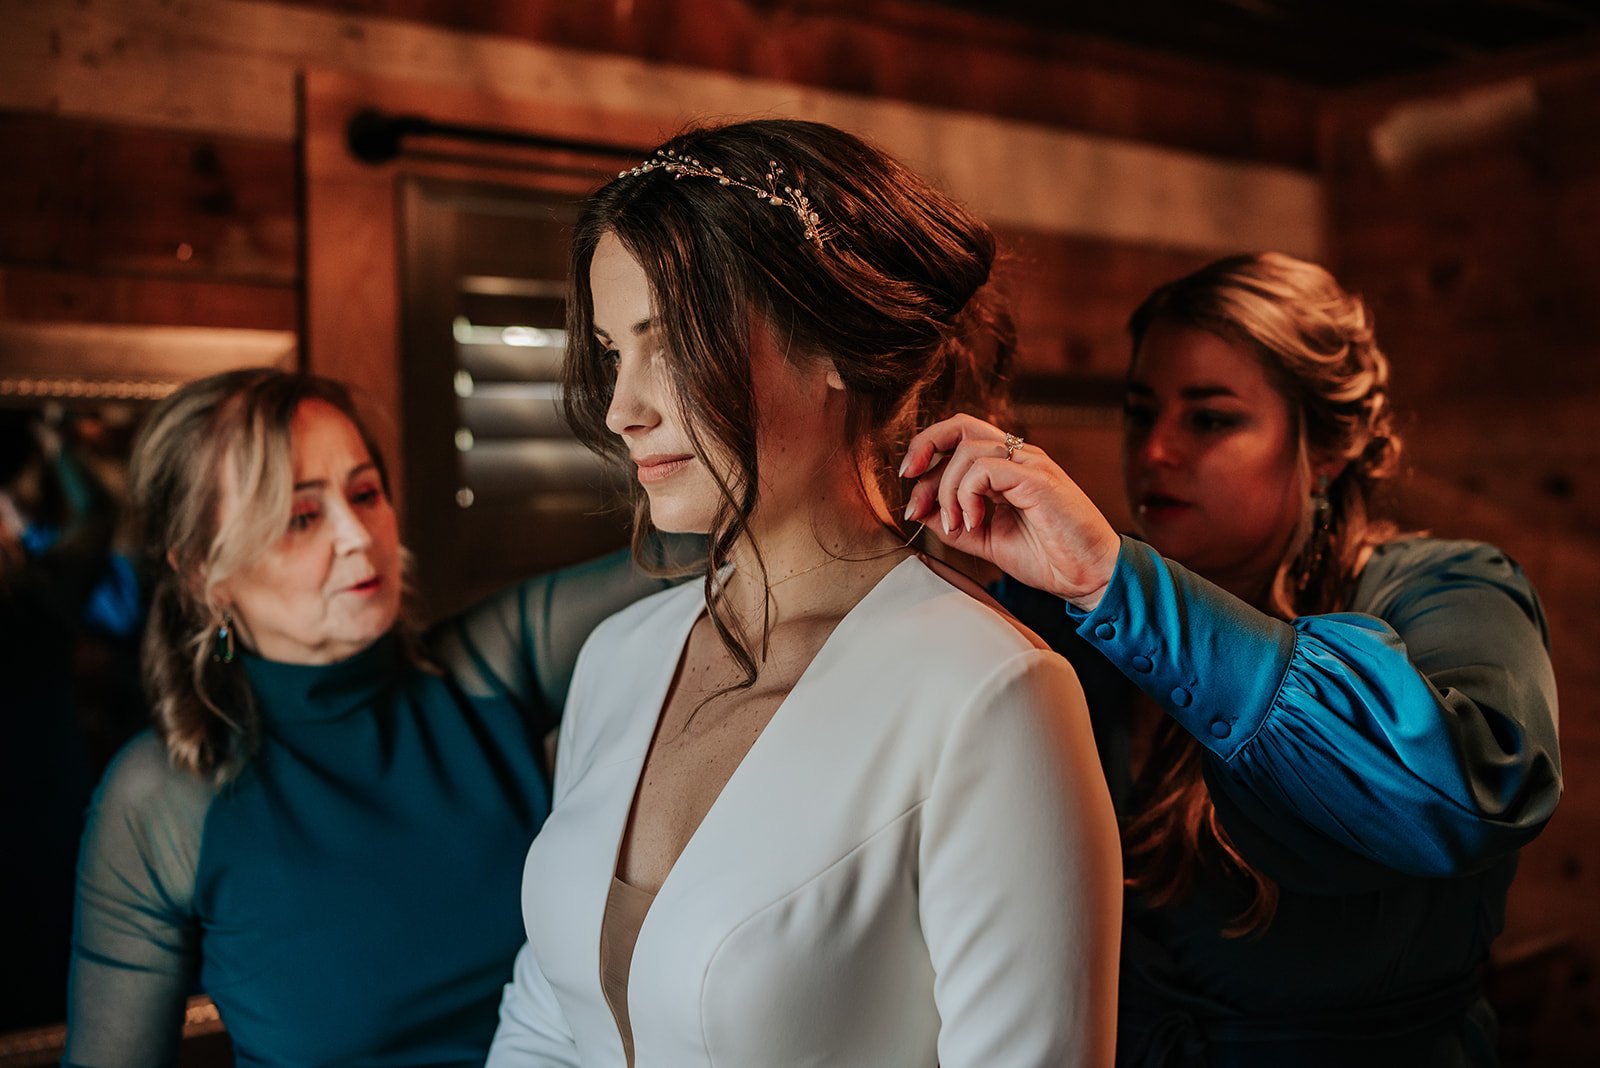 The bride's mother and another woman help her get ready for her winter wedding at 7F Lodge in College Station, TX.